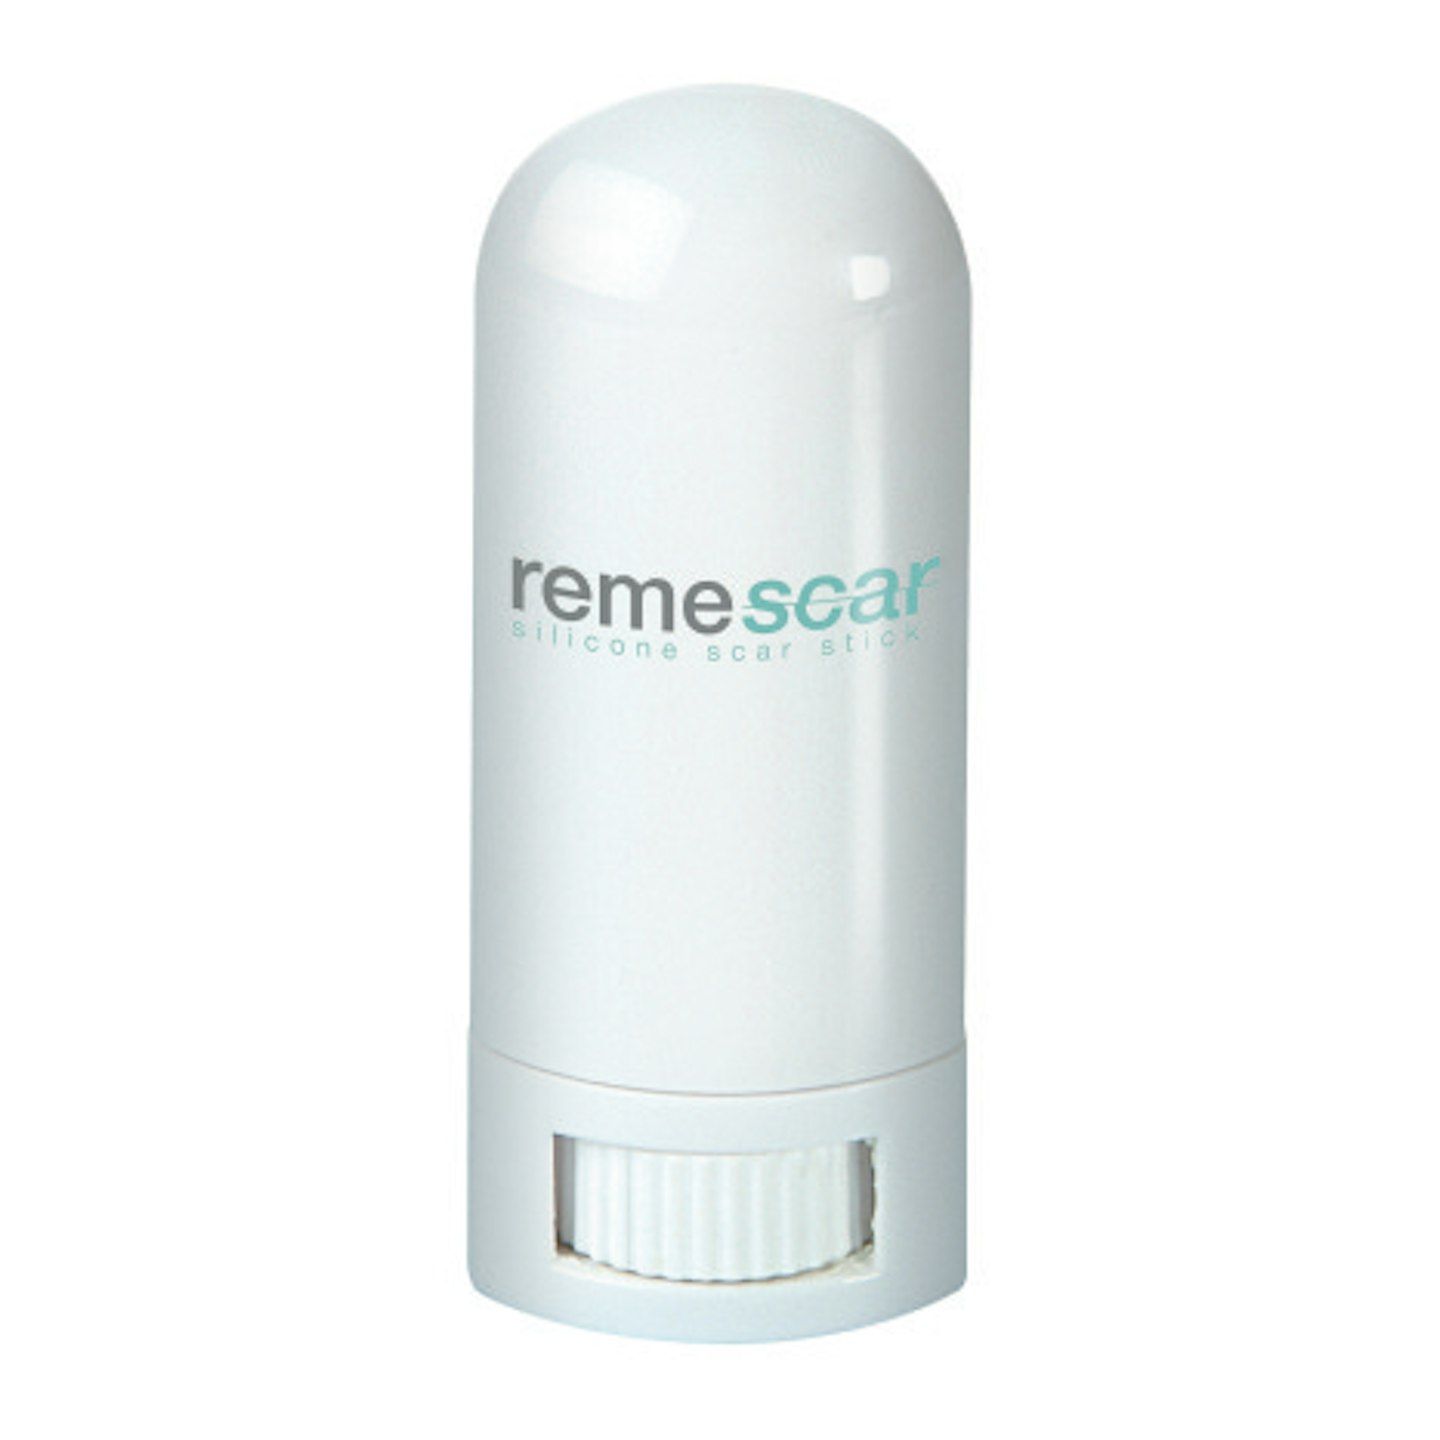 Katie swears by Remescar products